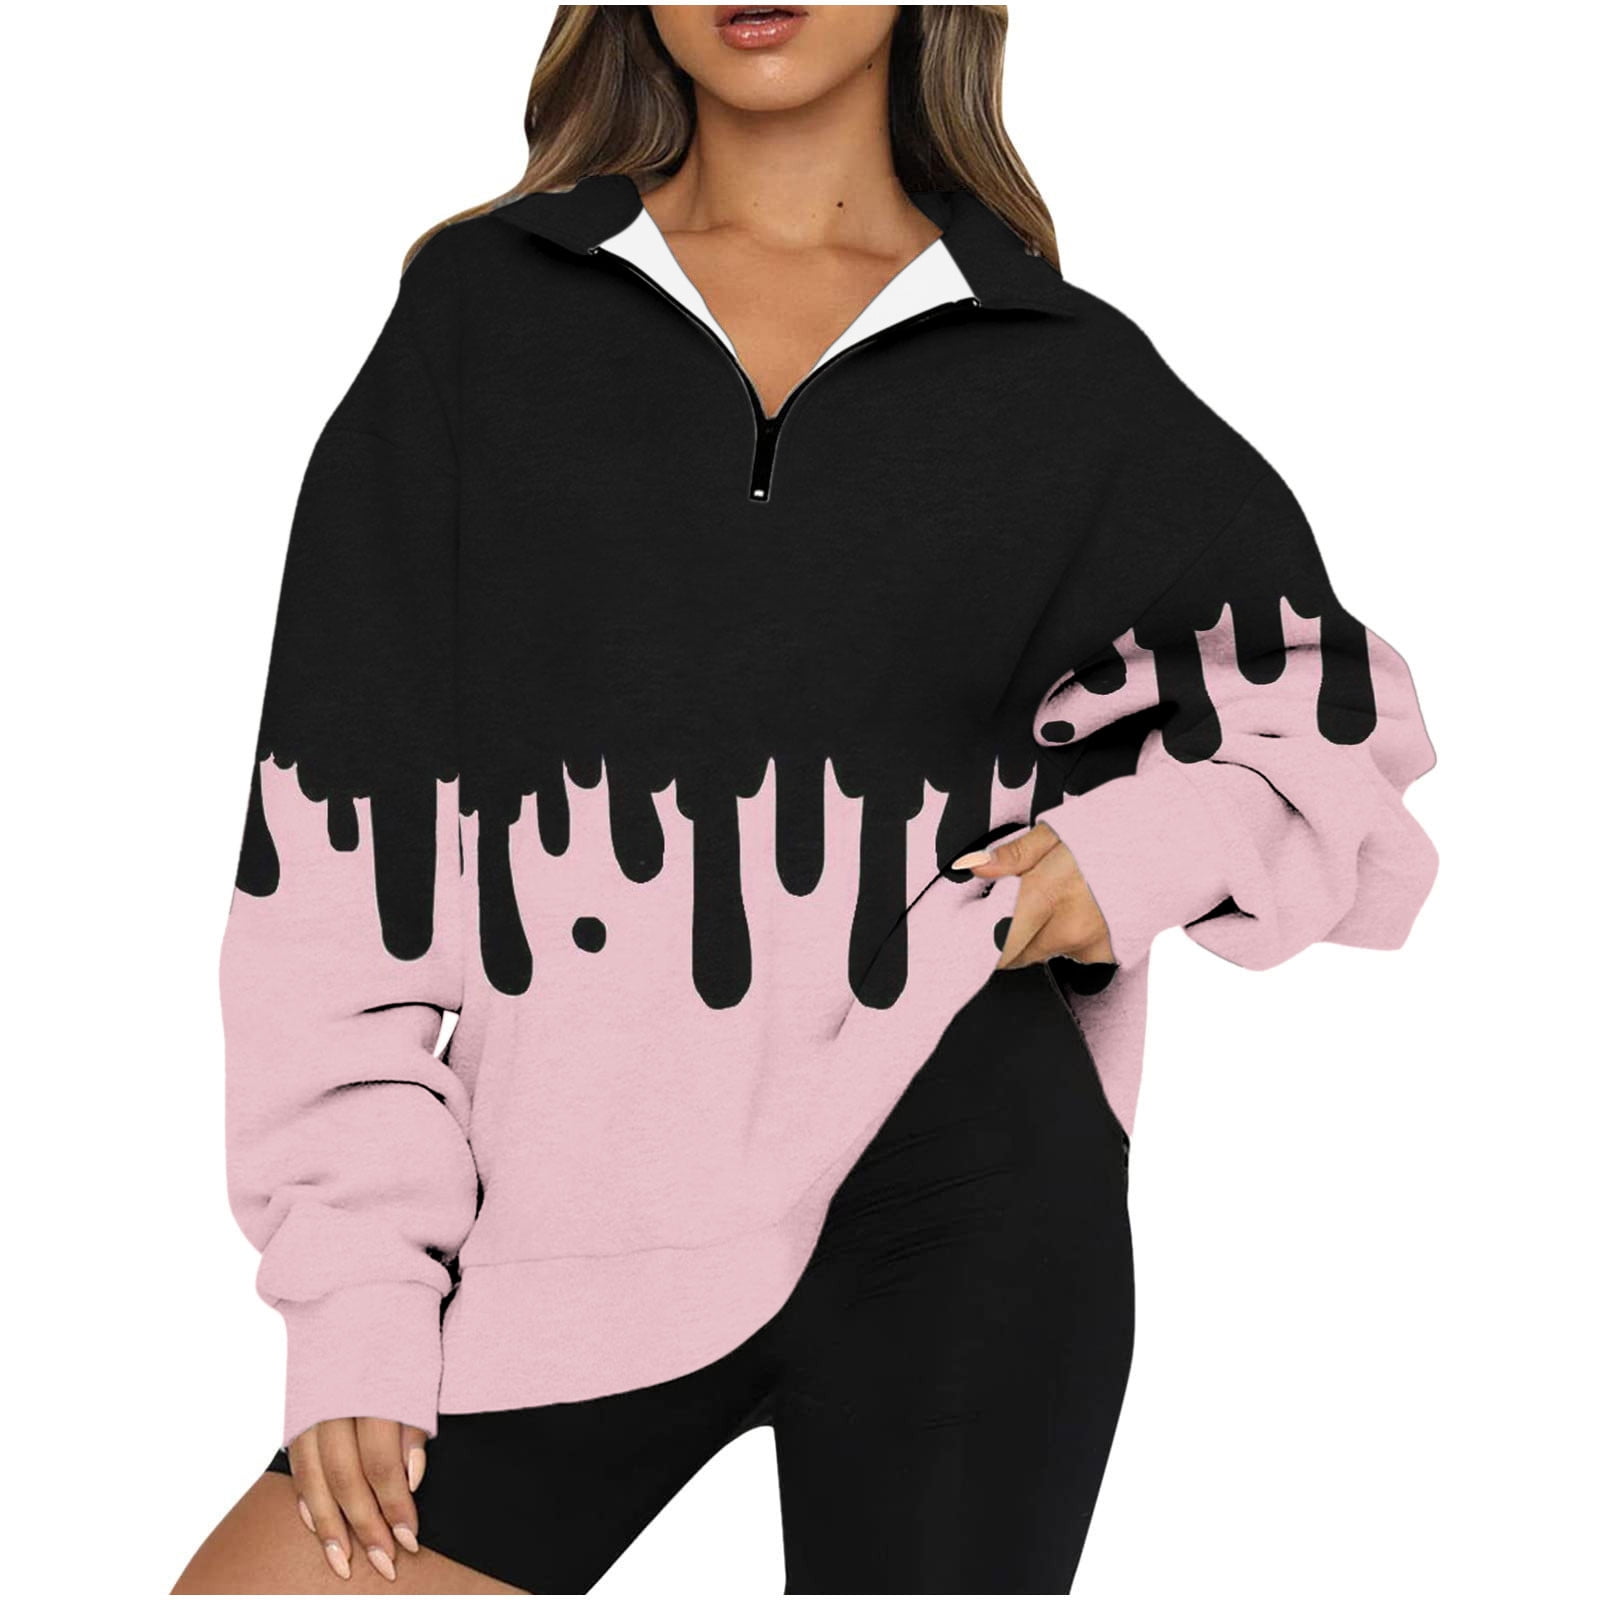  Yyeselk my order placed by me Womens Casual Long Sleeve  Sweatshirt Fall Trendy Graffiti printing Crew Neck Cute Pullover Relaxed  Fit Blouses Tops Dark Gray : Sports & Outdoors